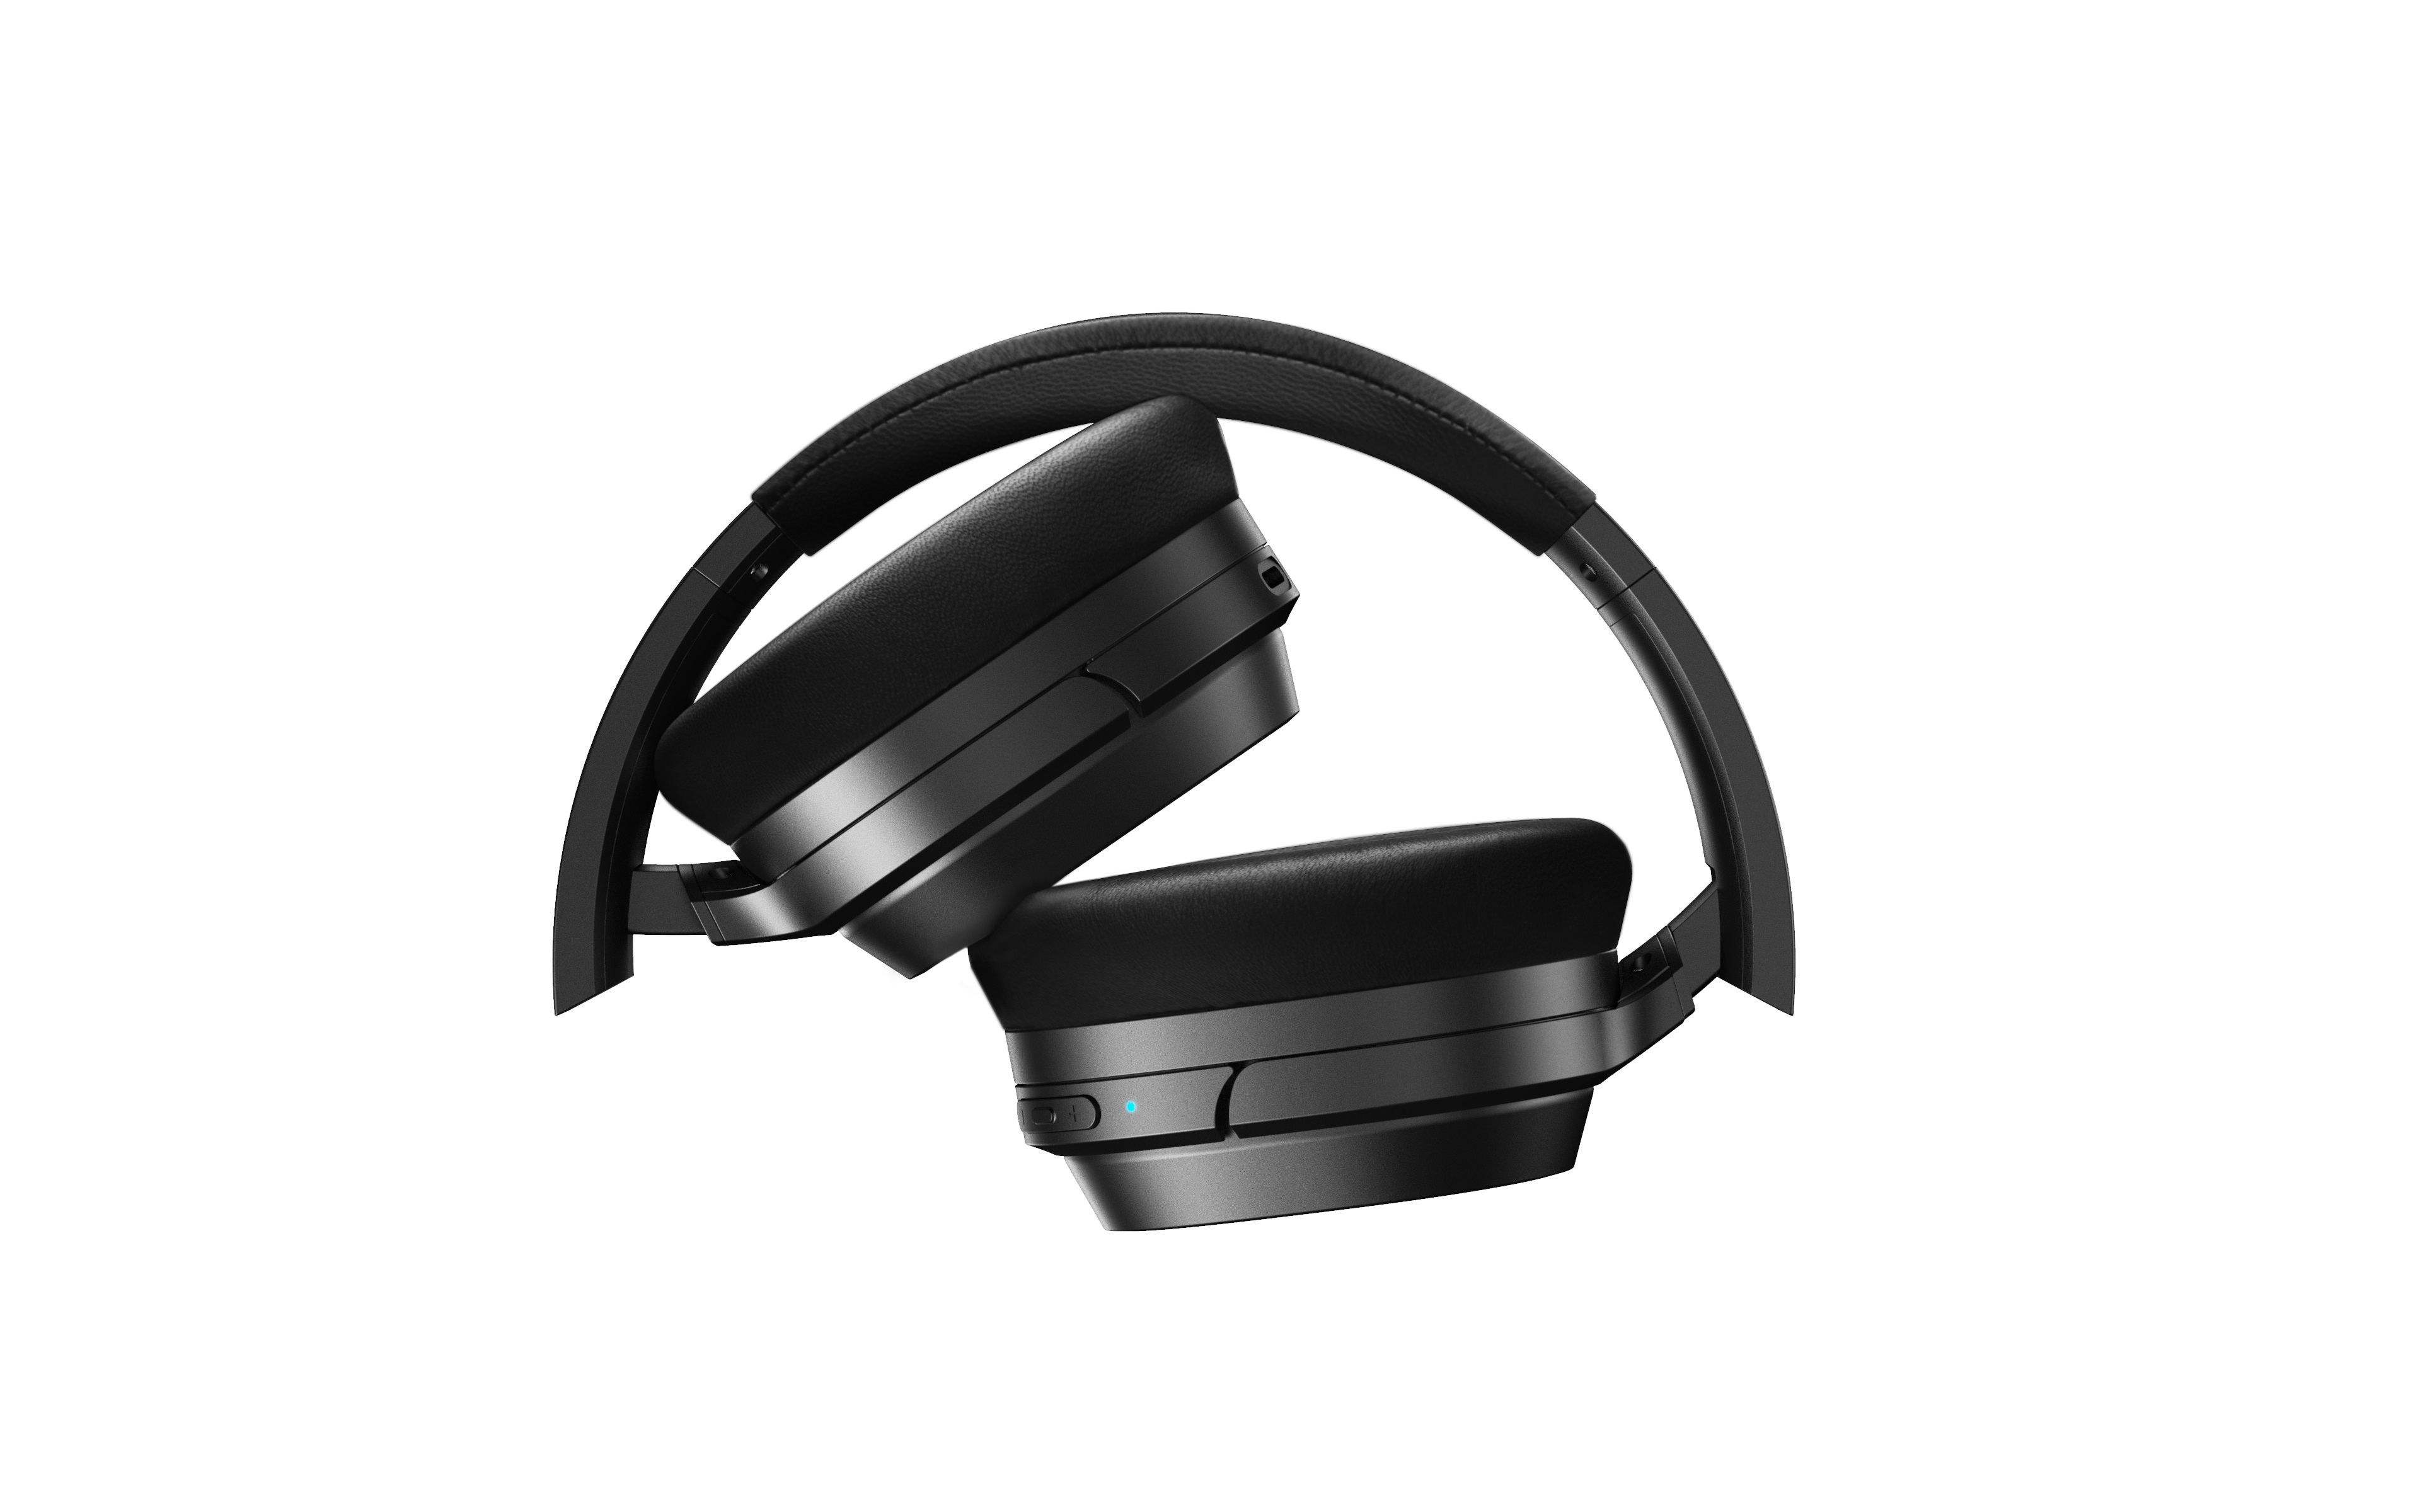 Edifier S3 Bluetooth headset CRYSTAL CLEAR CALL QUALITY 80hrs battery life USB-C SBC, Qualcomm® aptX™, Qualcomm® aptX™ HD, Qualcomm® aptX™ Adaptive